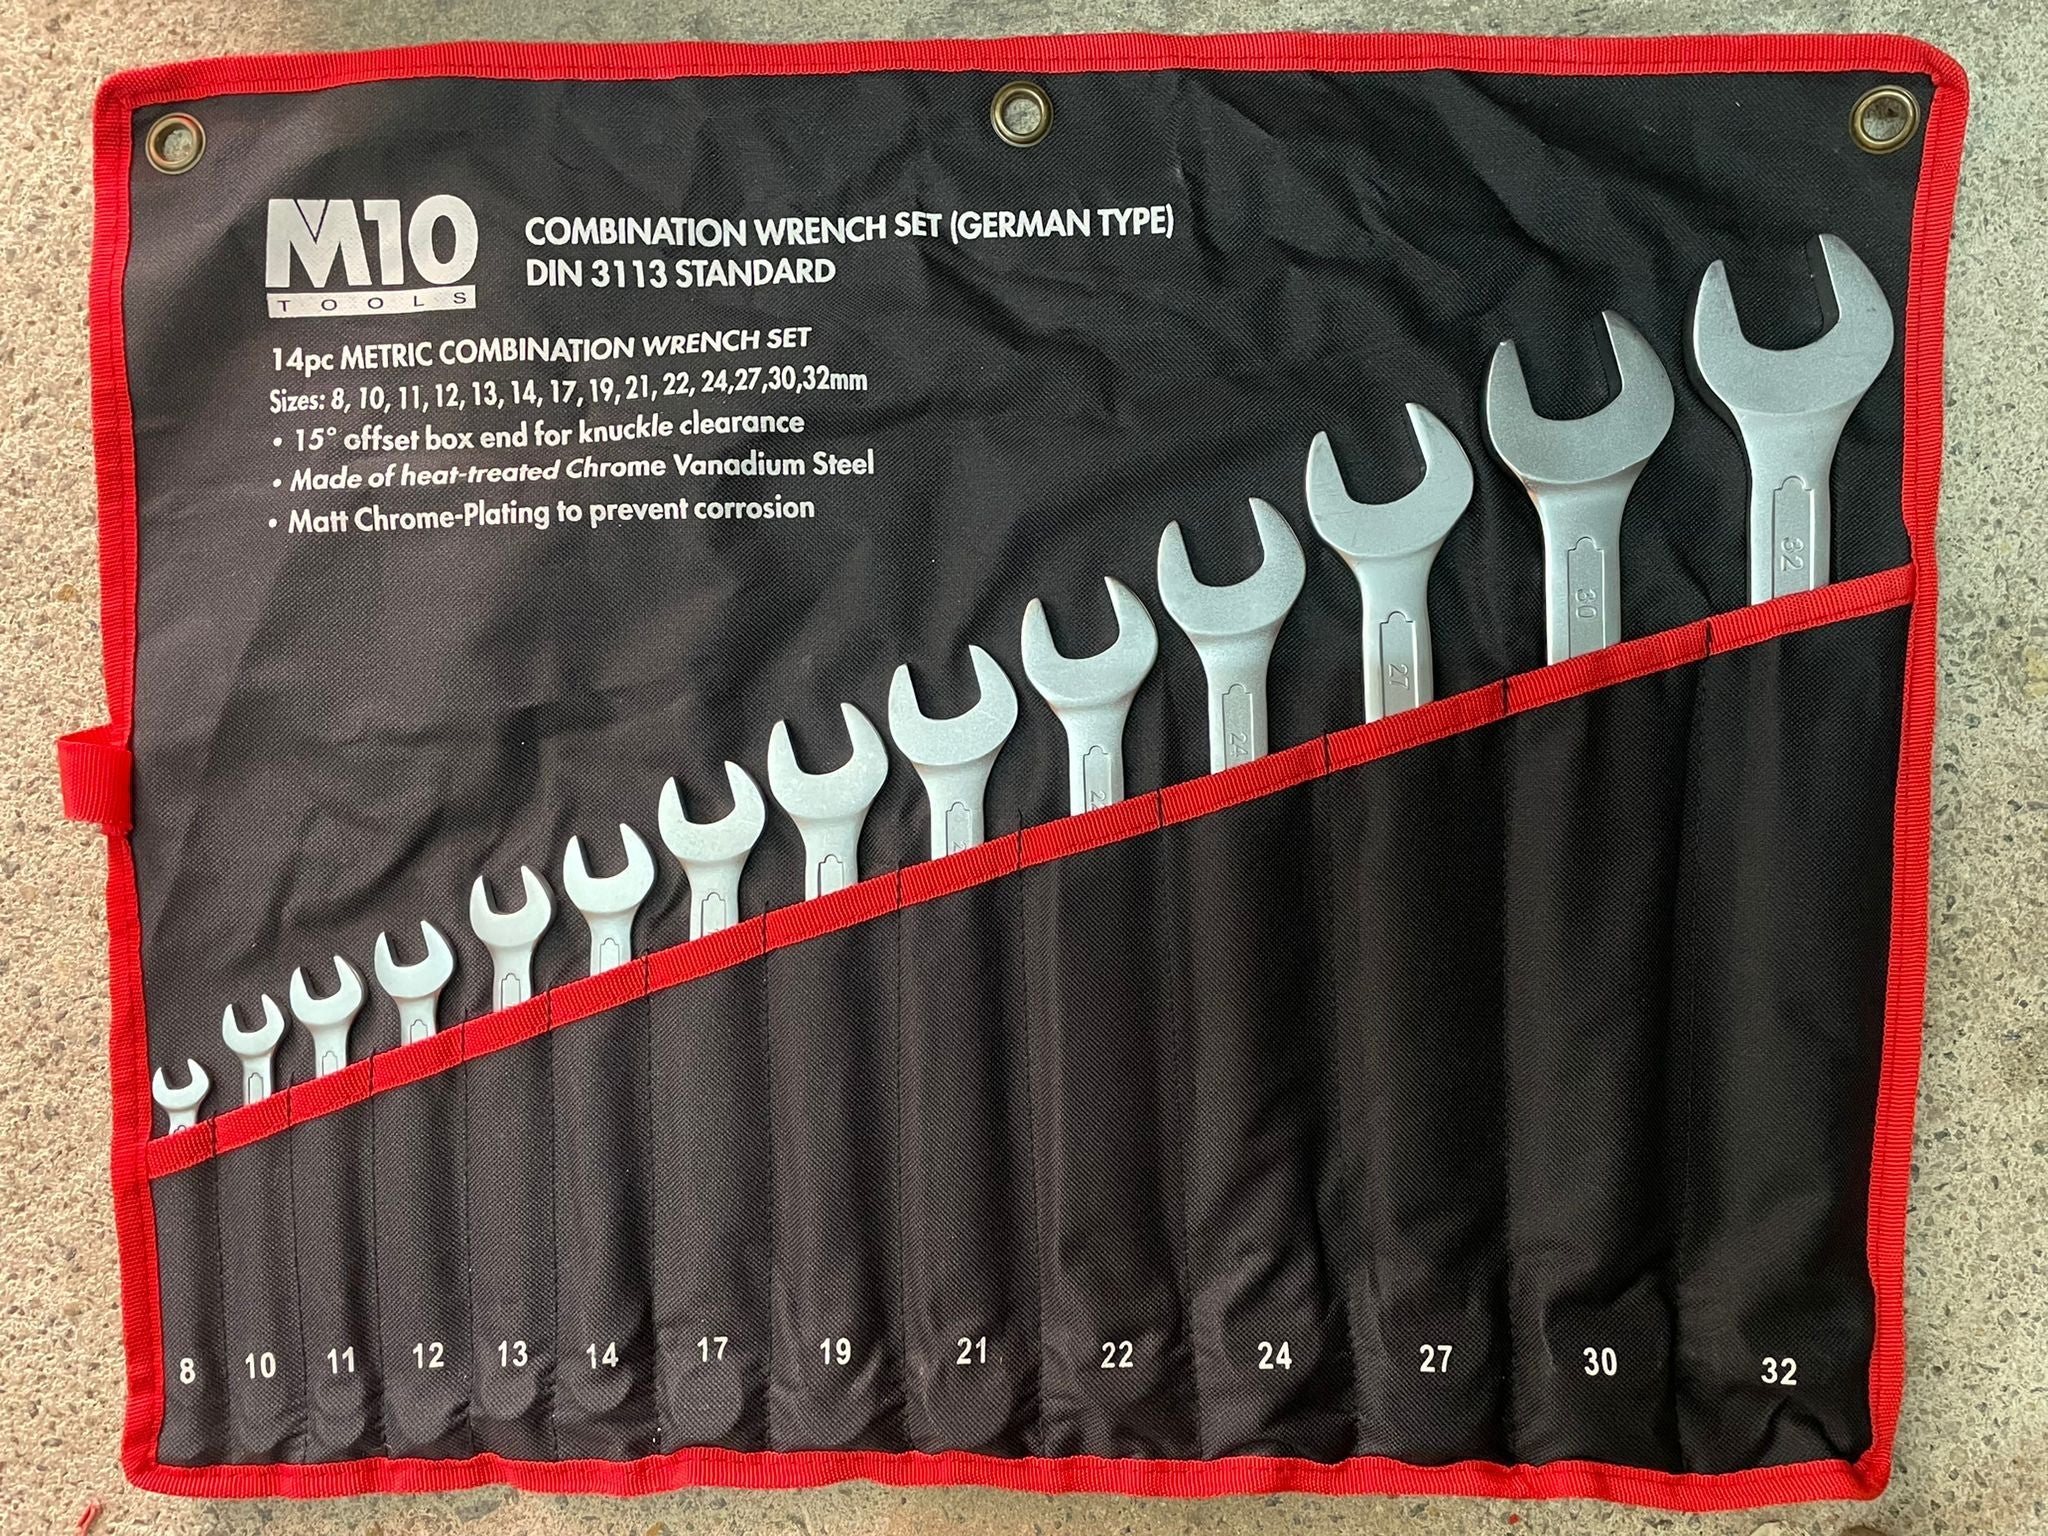 M10 005-011-114 8-32mm Combination Wrench Set With Box 14pcs | Model :